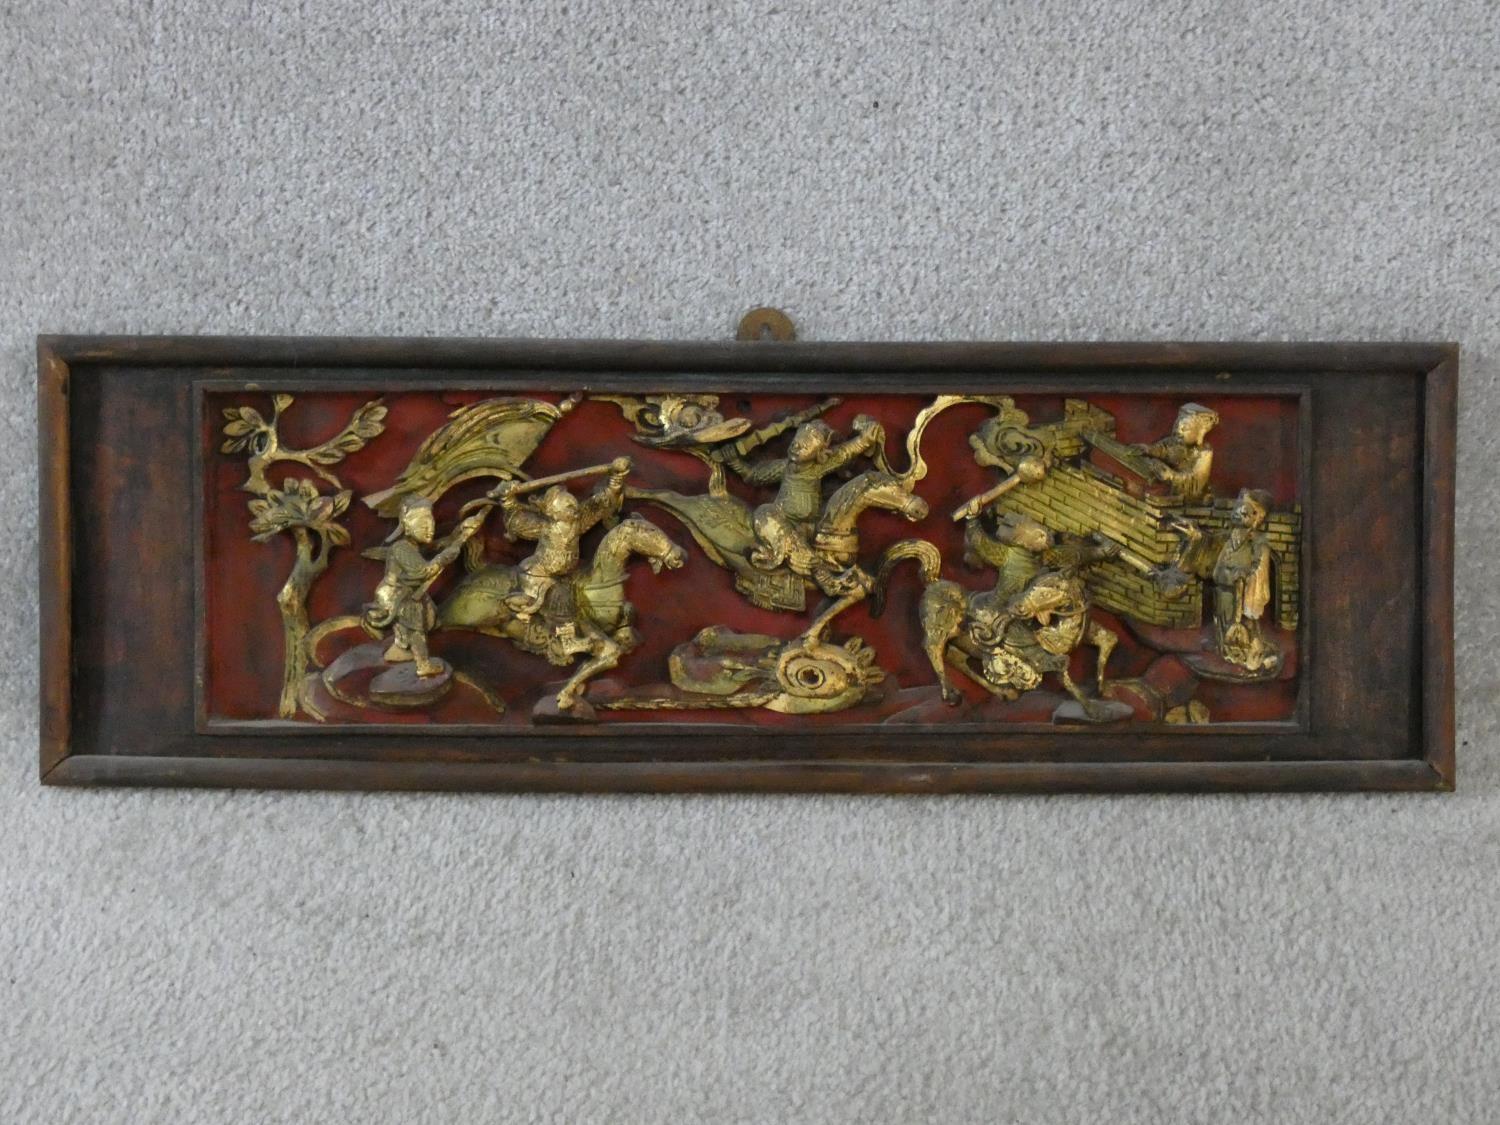 An antique Chinese carved lacquered and gilded panel with red round and warriors on horseback